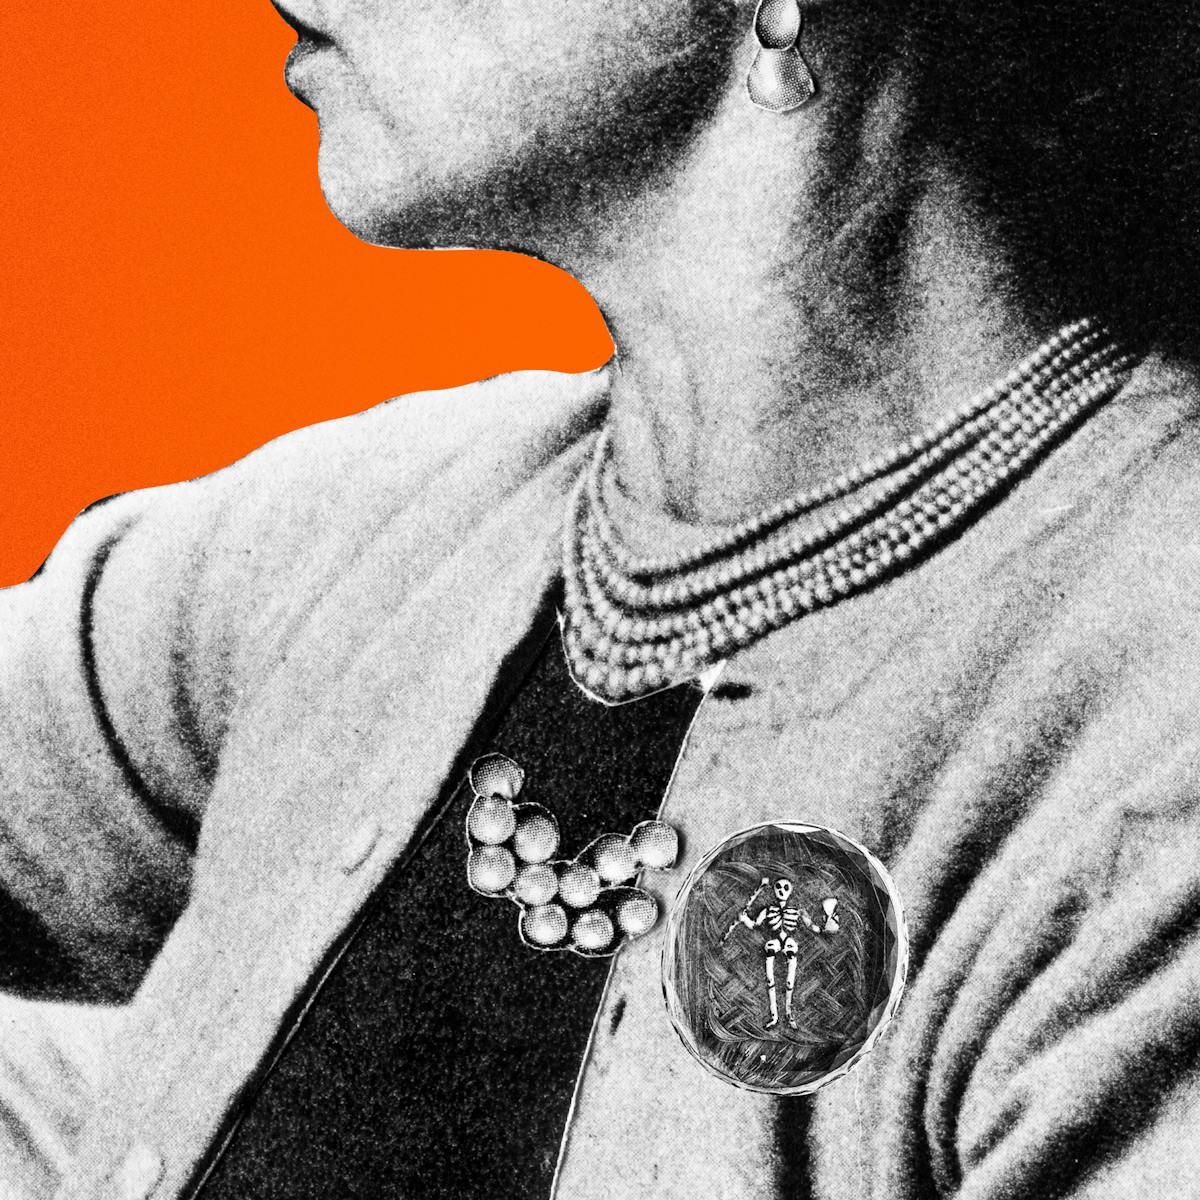 Coloured photograph of a black and white paper collage on a bright orange background. The upper body, neck and lower facial profile of a lady is shown. She is wearing a layered pearl necklace, a dangling earring and two different brooches. Inside one of the brooches there is plaited strands of hair and a small skeleton embellishment. 